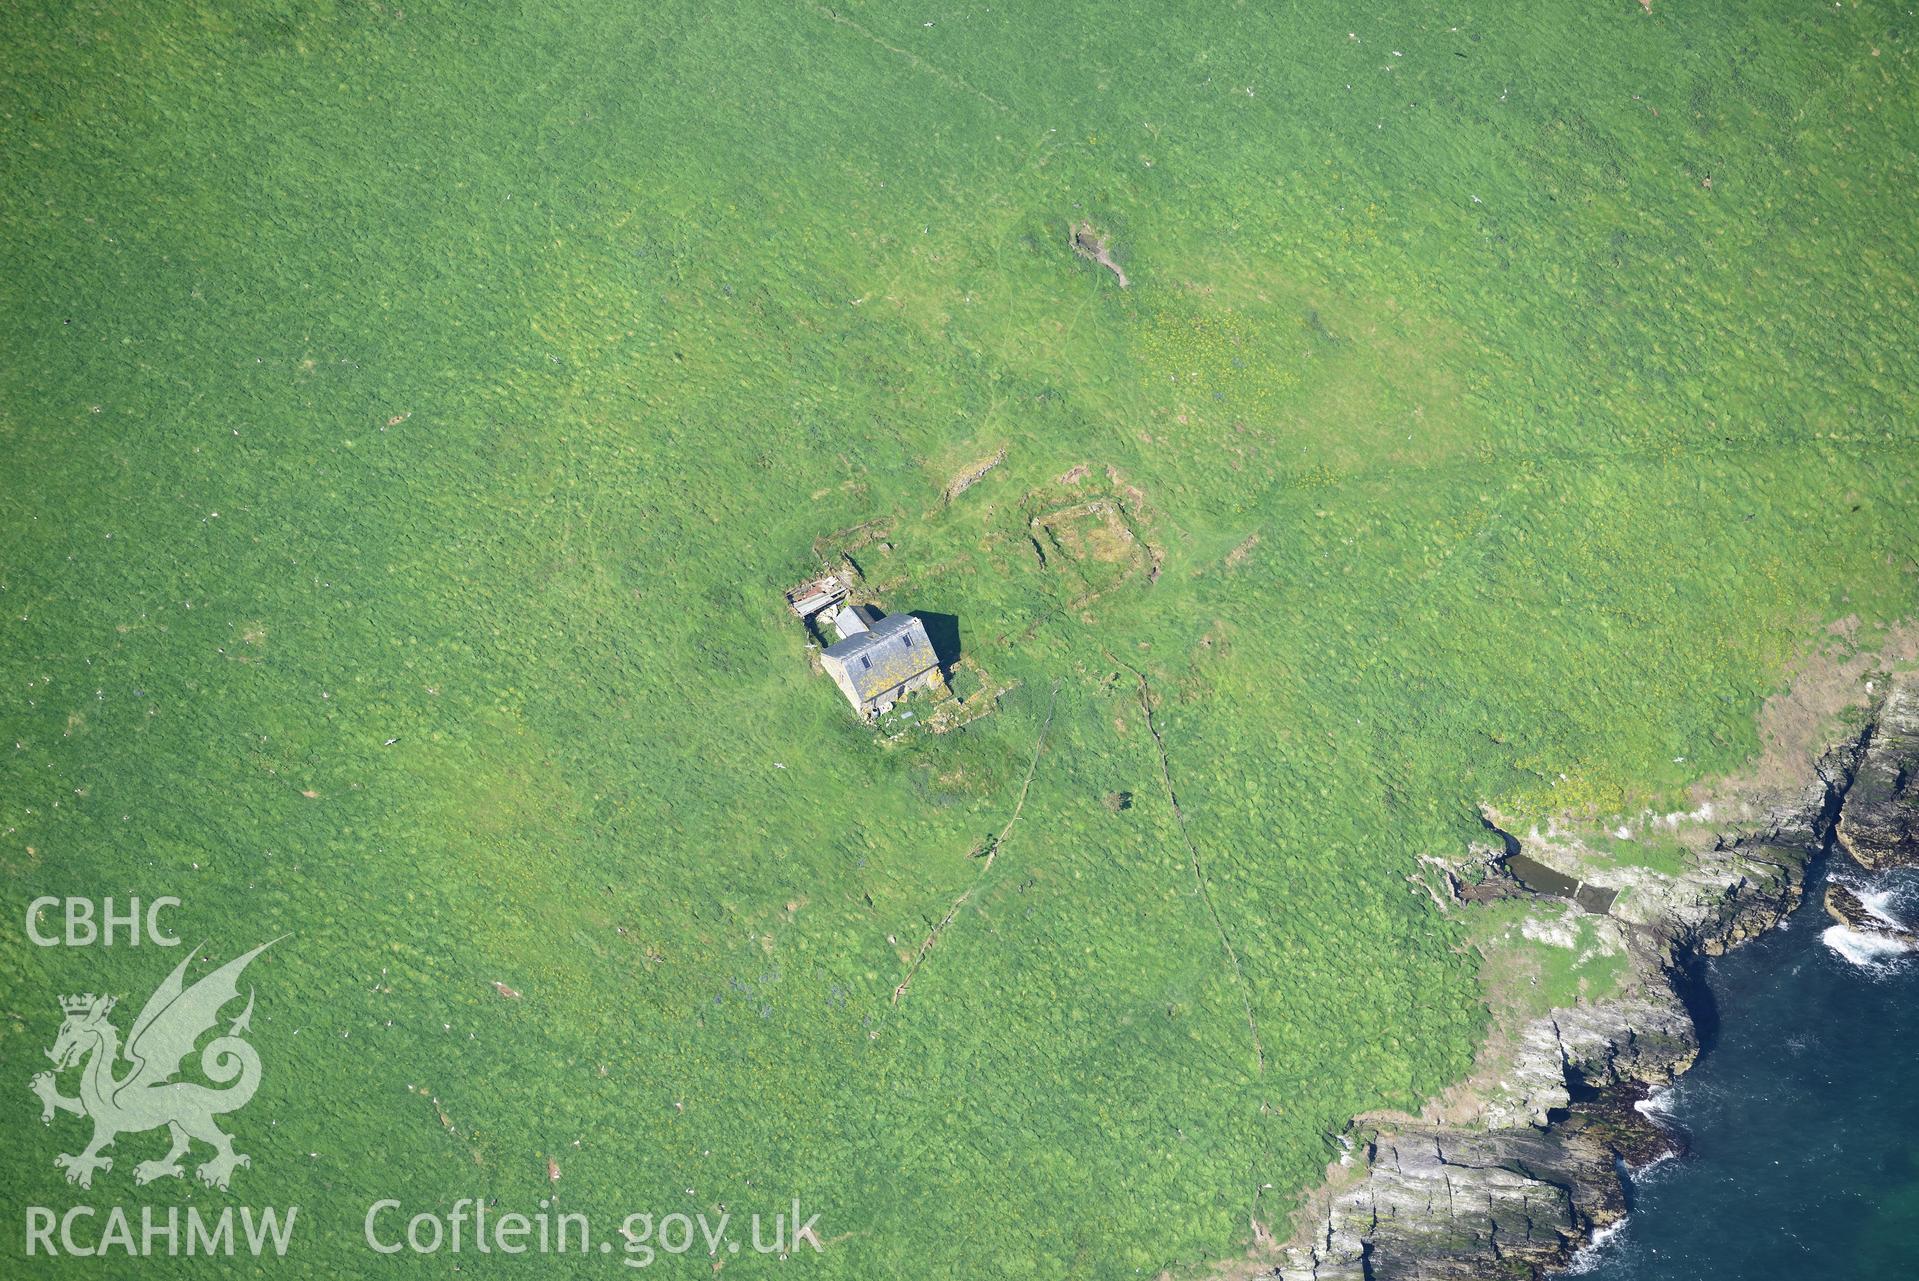 Aerial photography of St Tudwal's Island East taken on 3rd May 2017.  Baseline aerial reconnaissance survey for the CHERISH Project. ? Crown: CHERISH PROJECT 2017. Produced with EU funds through the Ireland Wales Co-operation Programme 2014-2020. All material made freely available through the Open Government Licence.